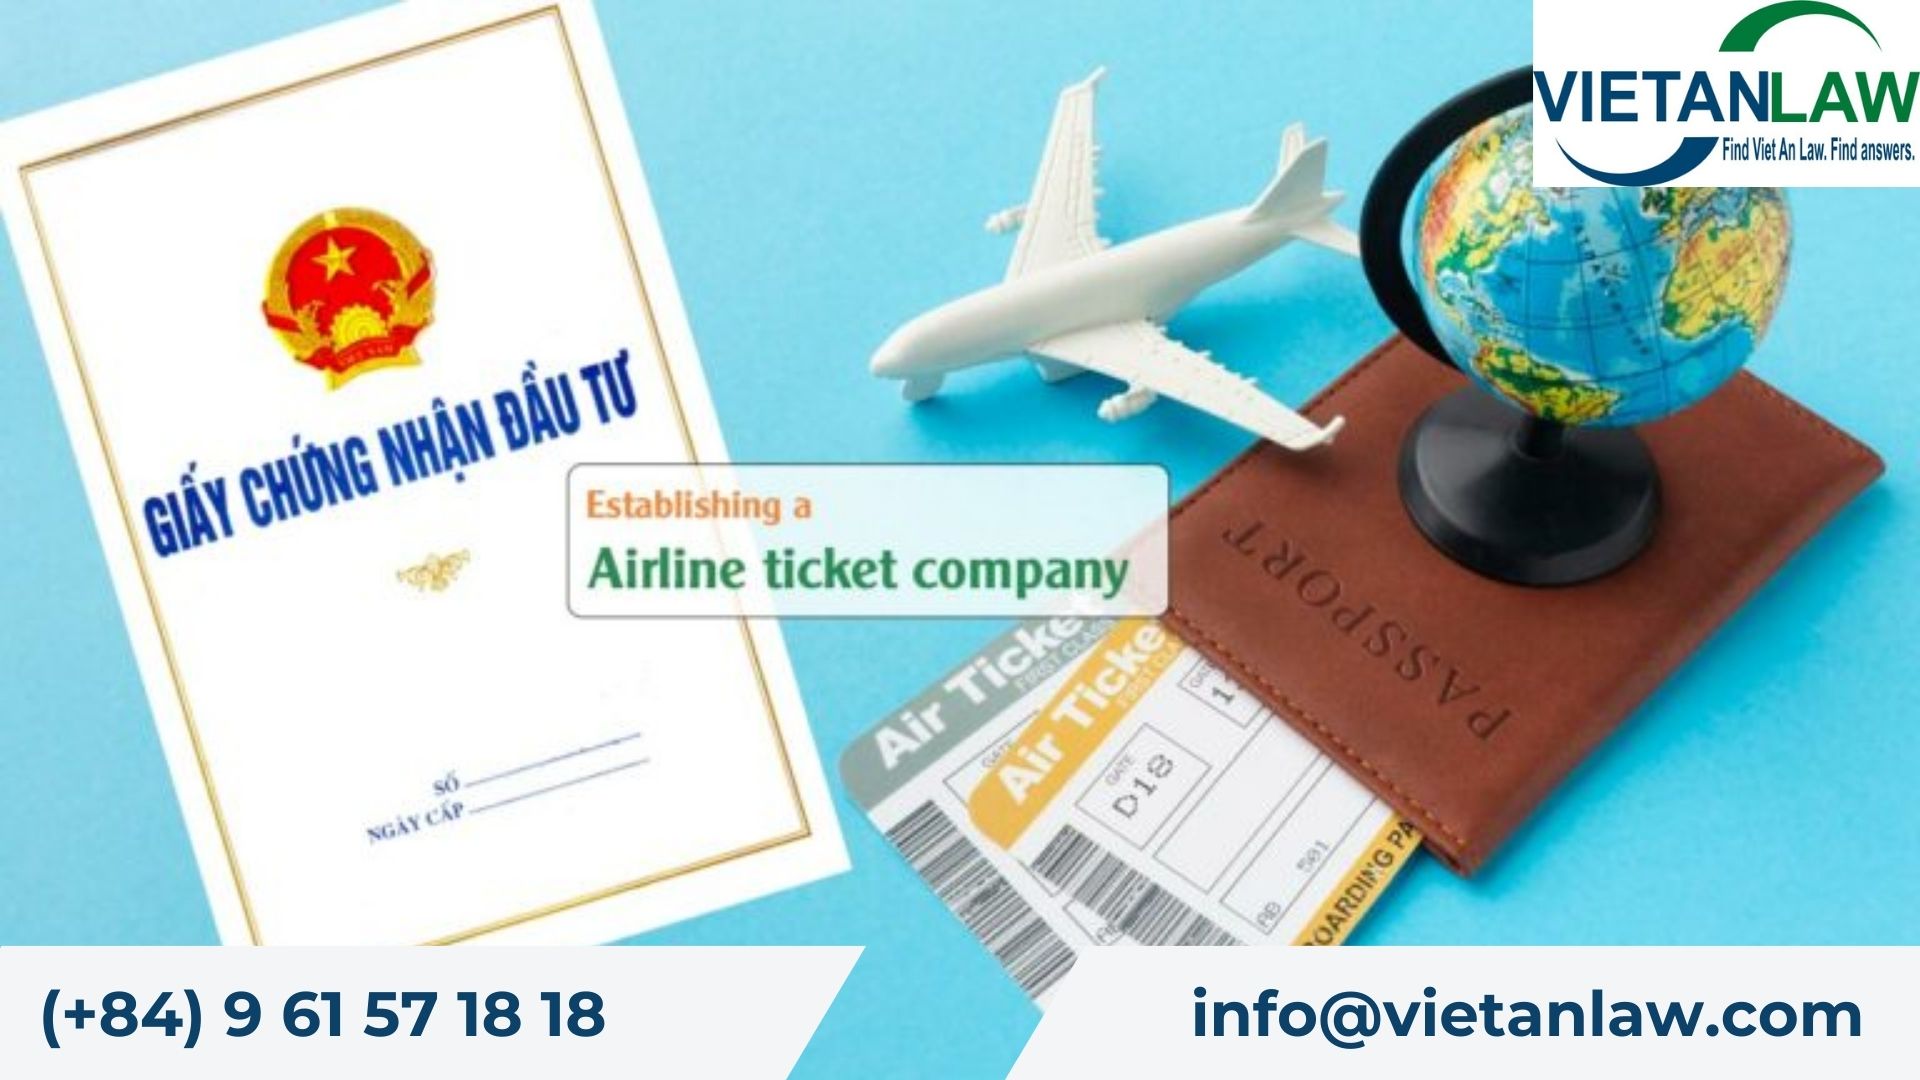 Setting a business in Vietnam for airline ticket trading